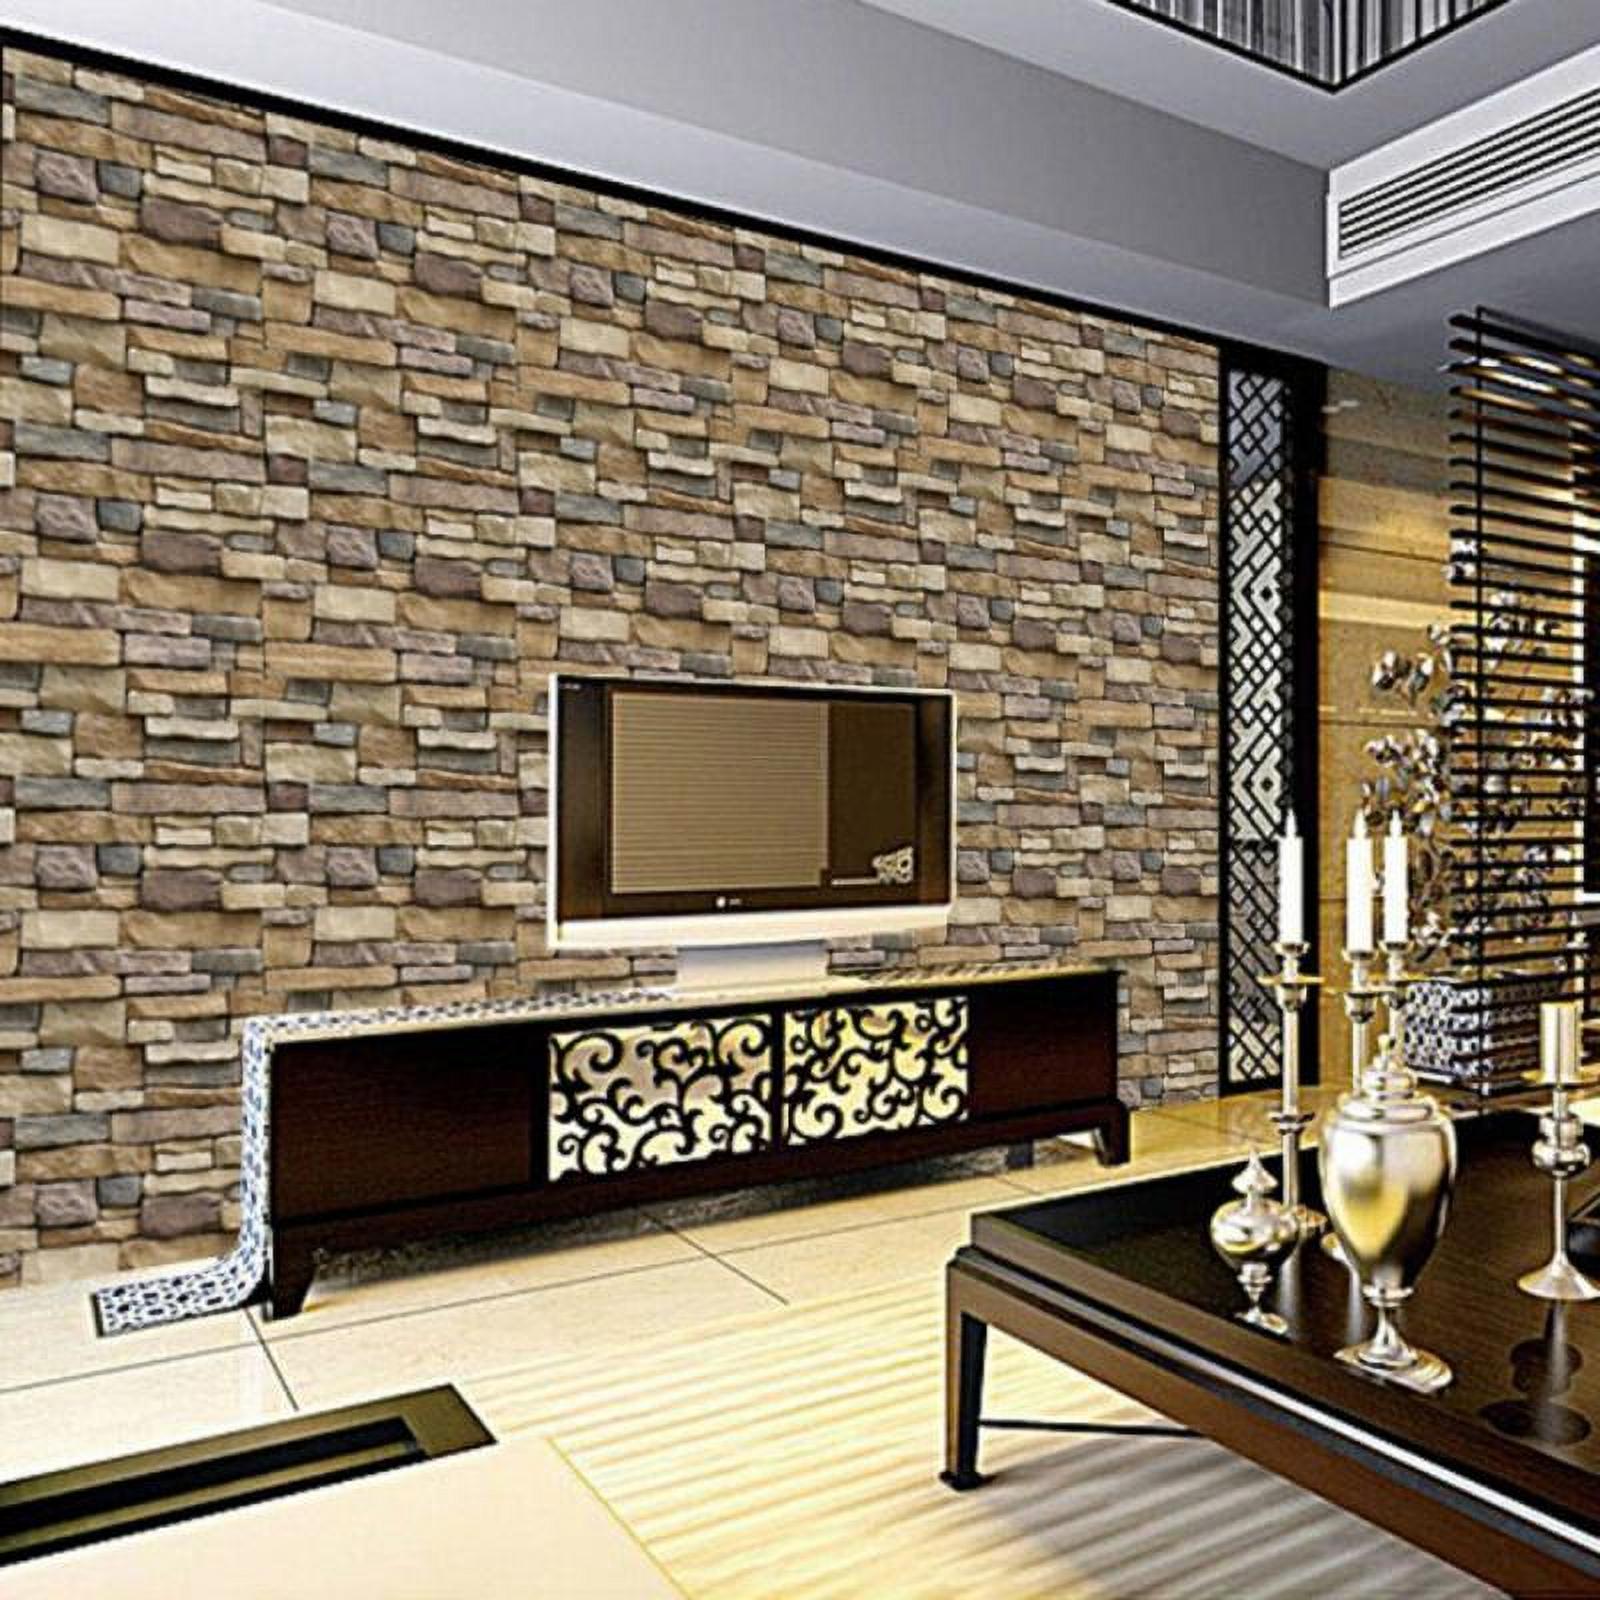 Keimprove 3D Brick Wall Stickers Self-Adhesive PVC Wallpaper Peel and Stick 3D Art Wall Panels for Living Room Bedroom Background Wall Decoration,Wall Panels Peel and Stick Wallpaper - image 2 of 7